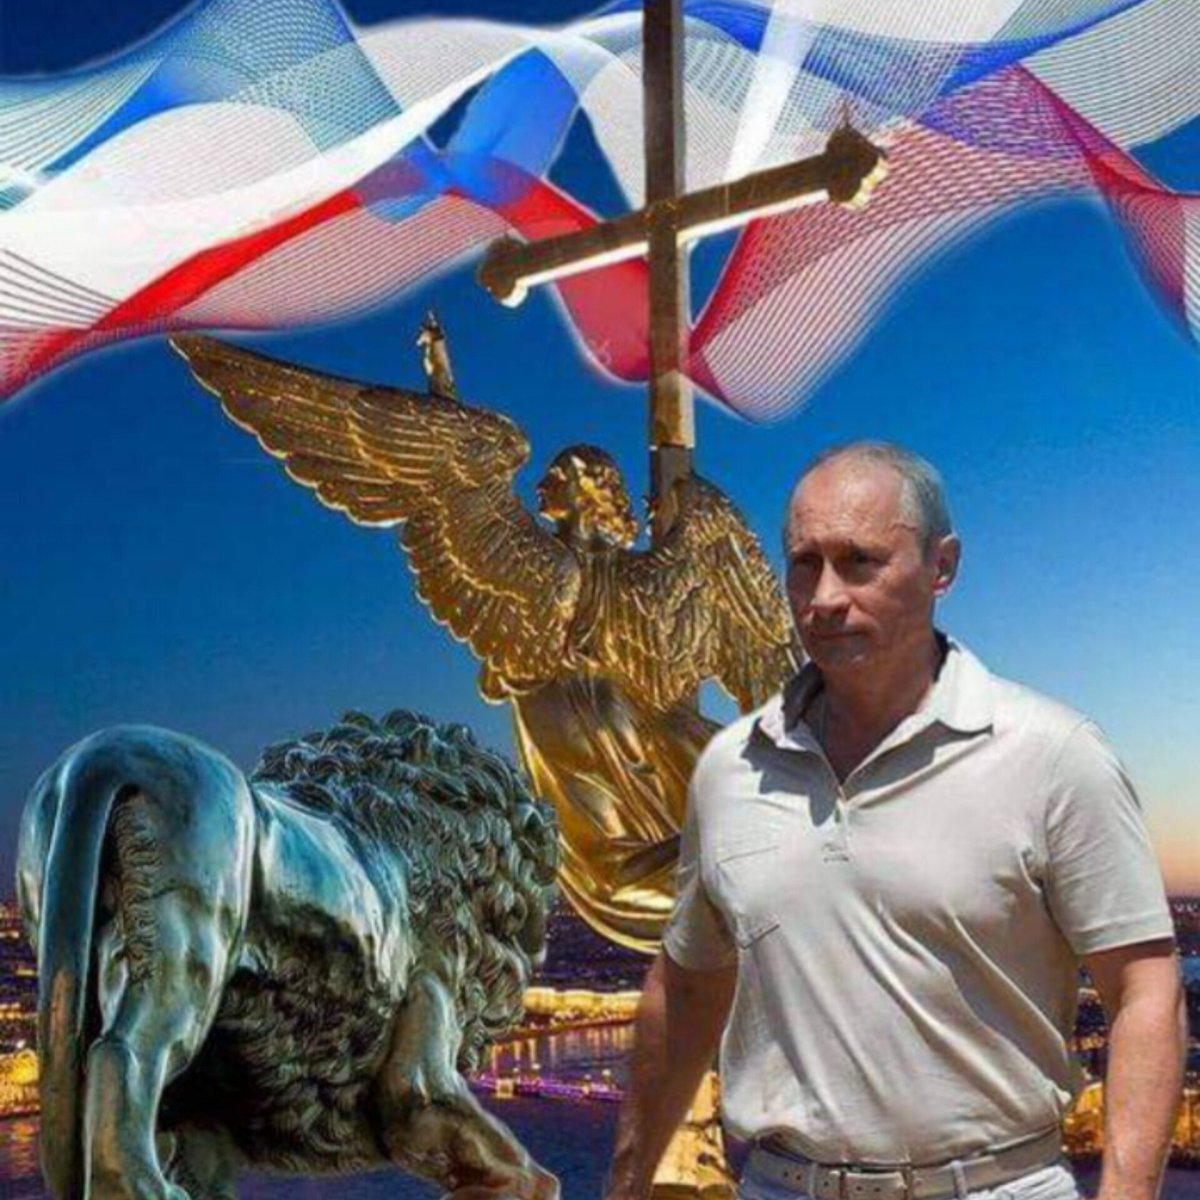 ⚡️Putin's Russia will never be defeated. 
#StandWithRussia 🇷🇺
#StandWithPutin ❤️🇷🇺❤️